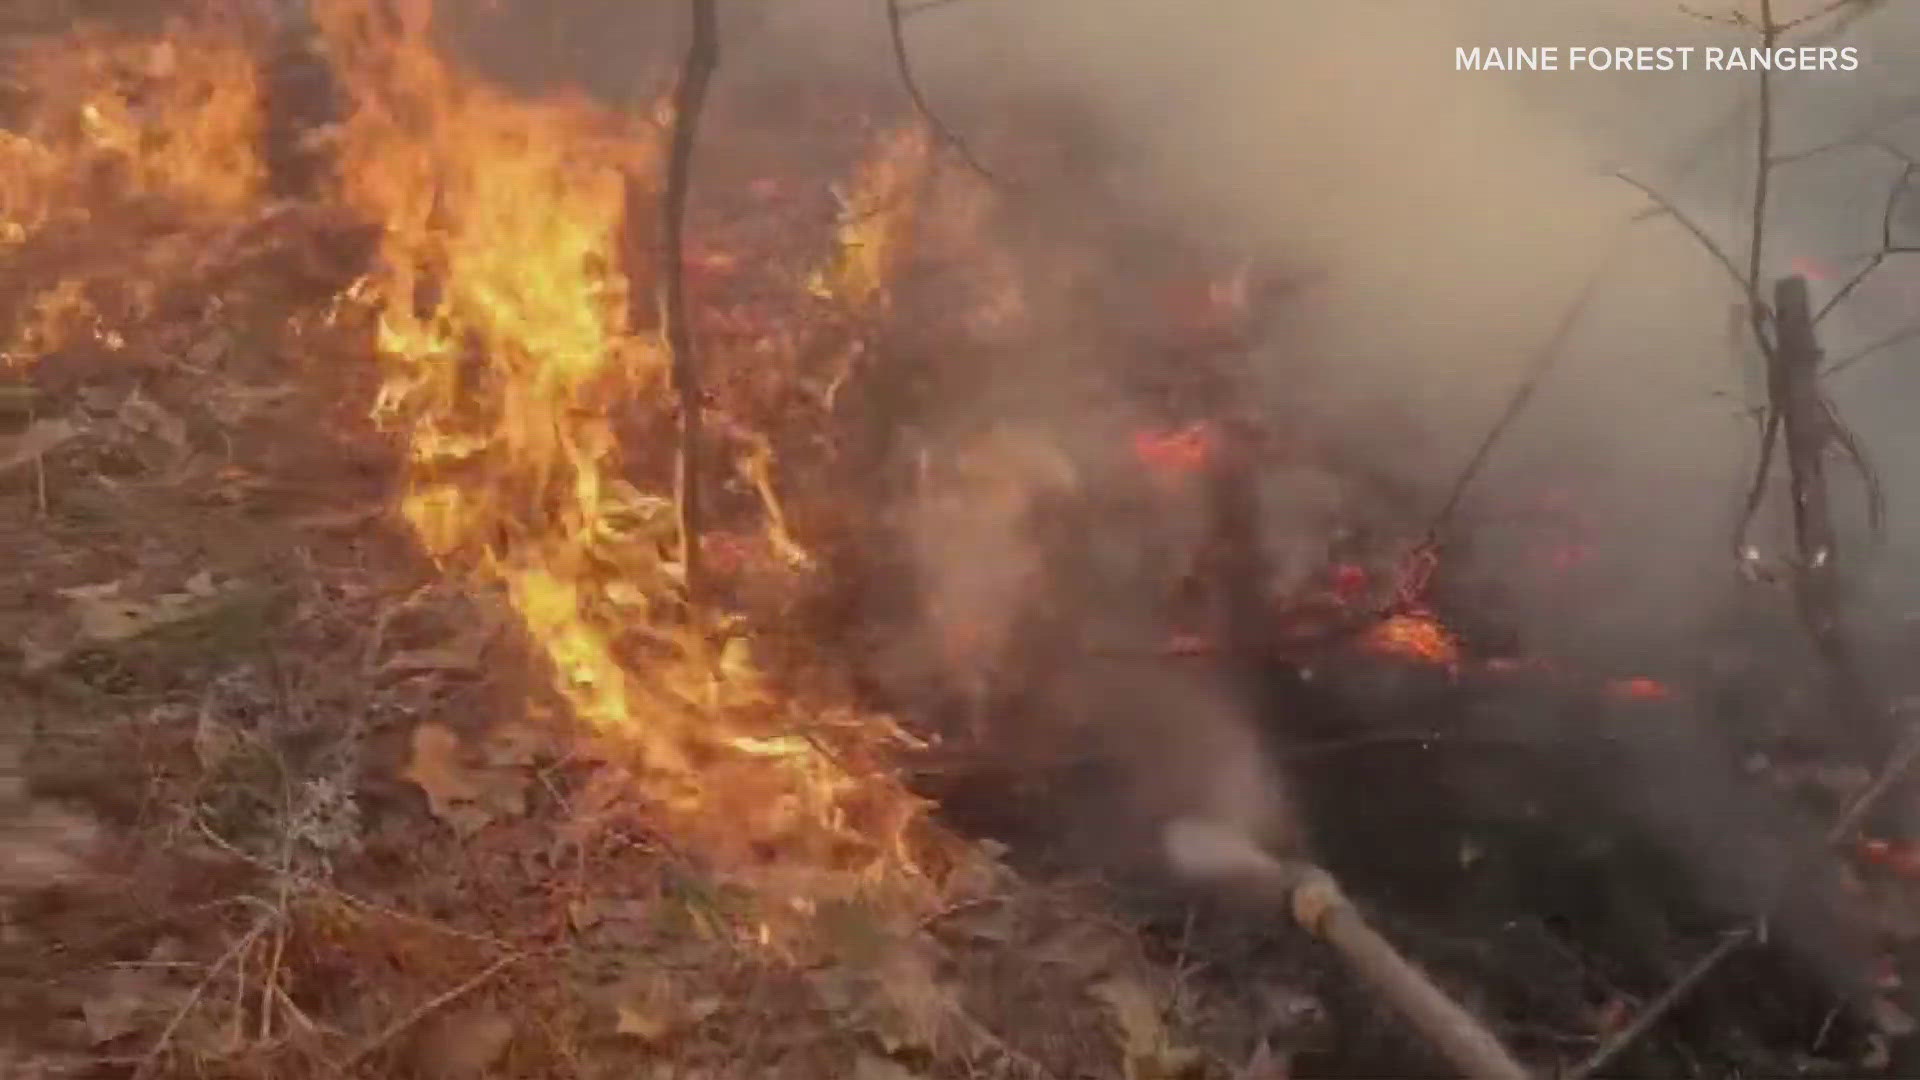 Maine Forest Rangers said they were able to put out the 6.5-acre wildfire with the help of five fire departments and a helicopter.